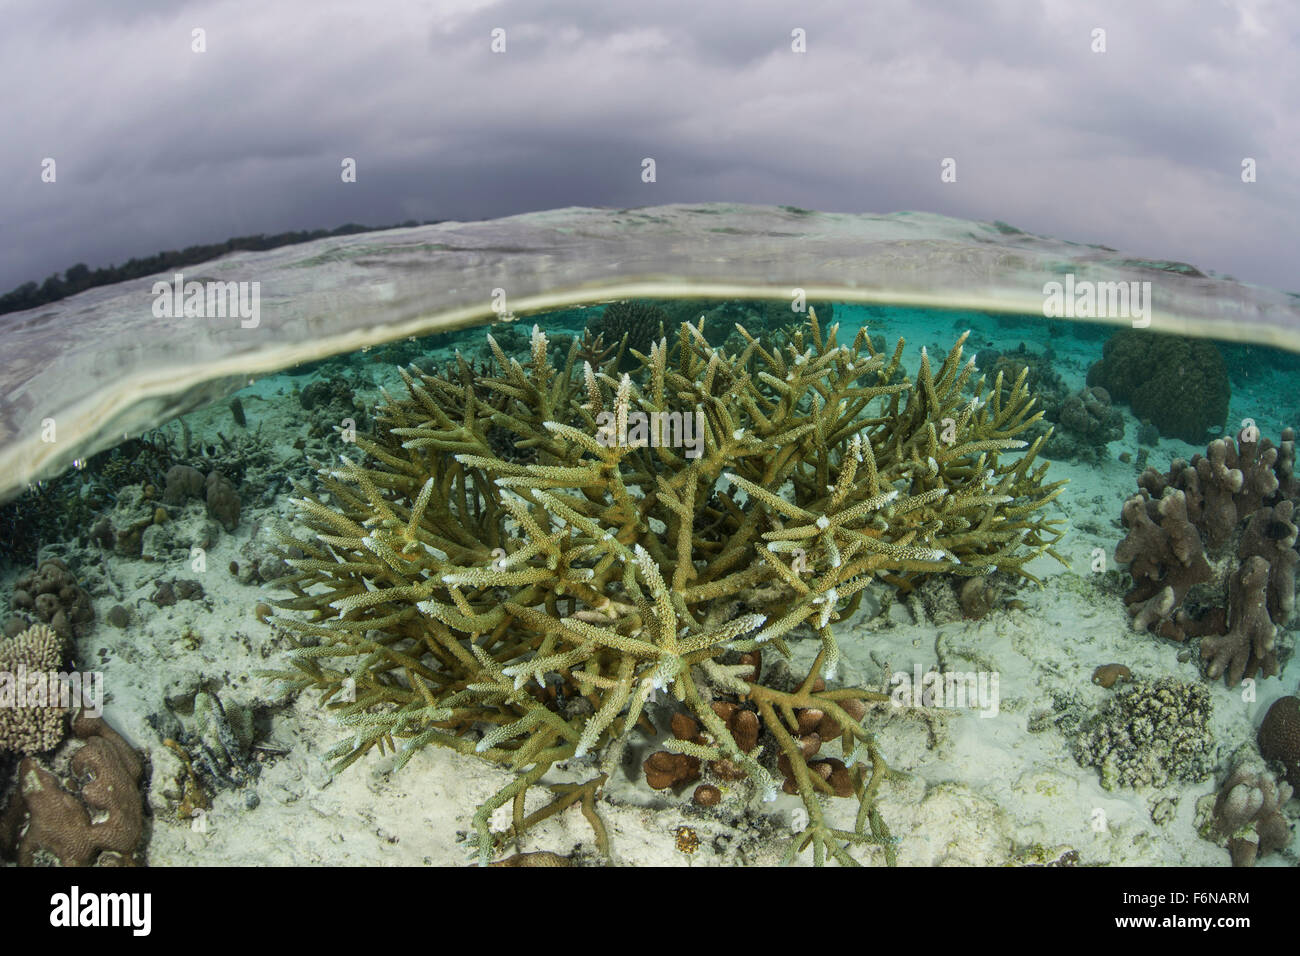 A staghorn coral colony grows in shallow water in the Solomon Islands. This Melanesian region is known for its spectacular marin Stock Photo